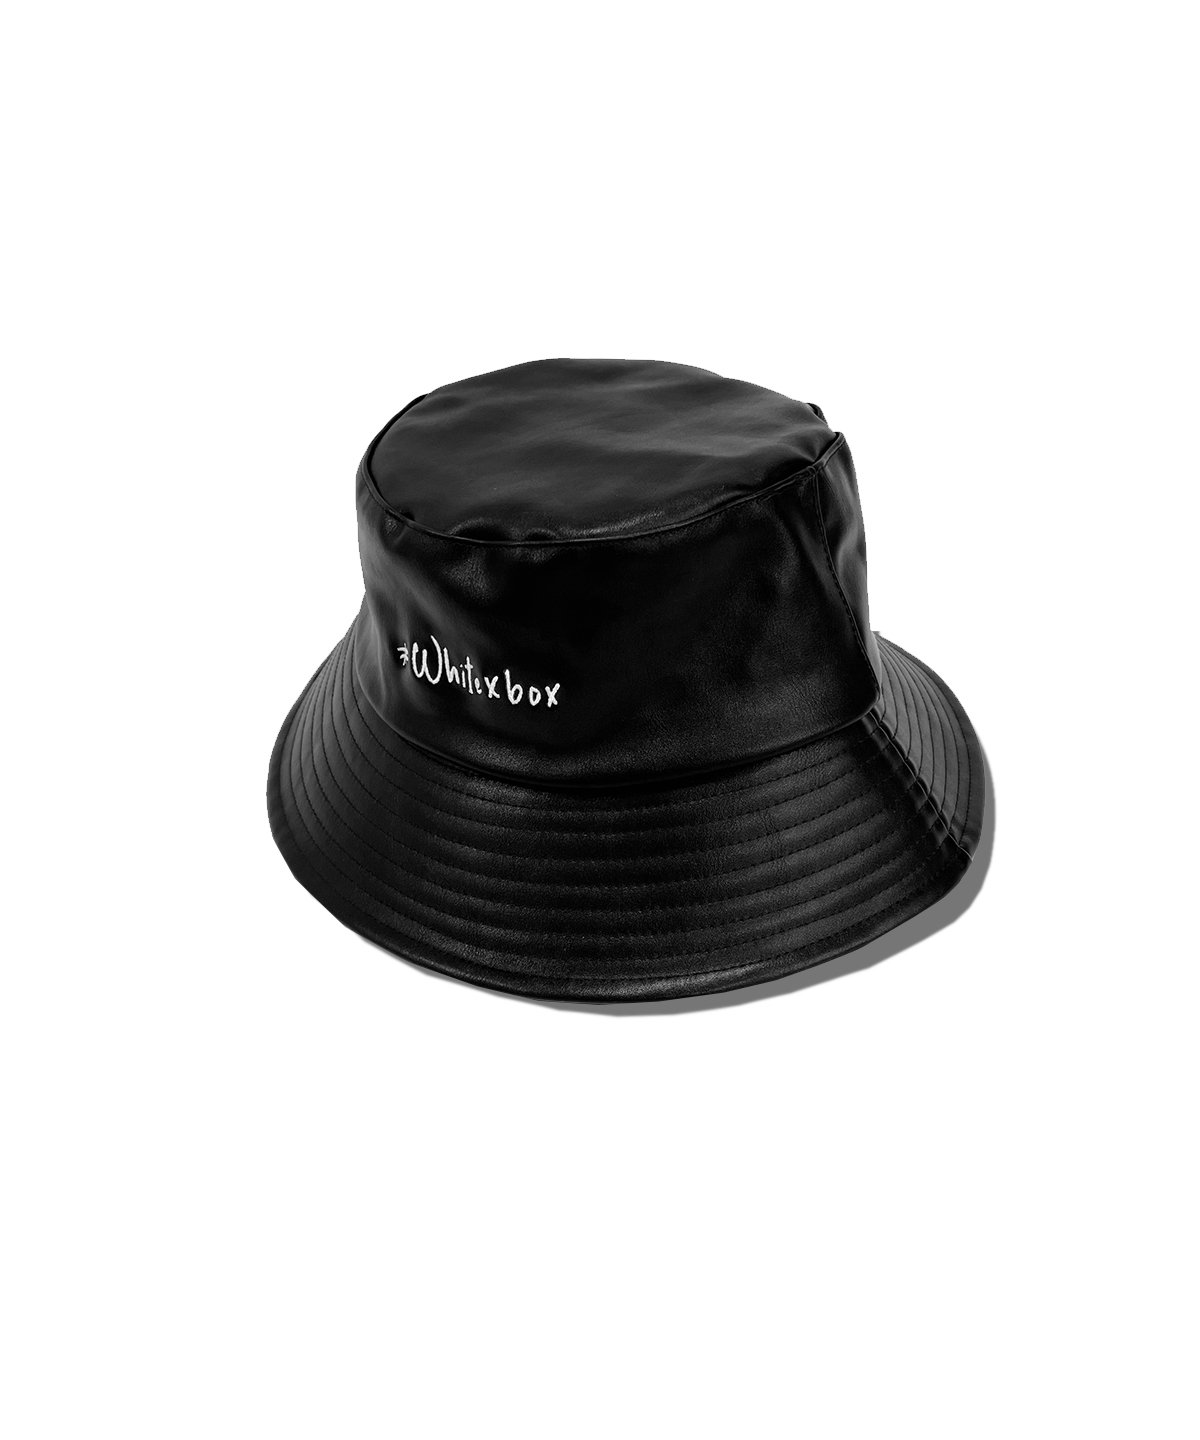 【22AW最新作】#white×box LOGO Leather Embroidery Bucket Hat.WHT